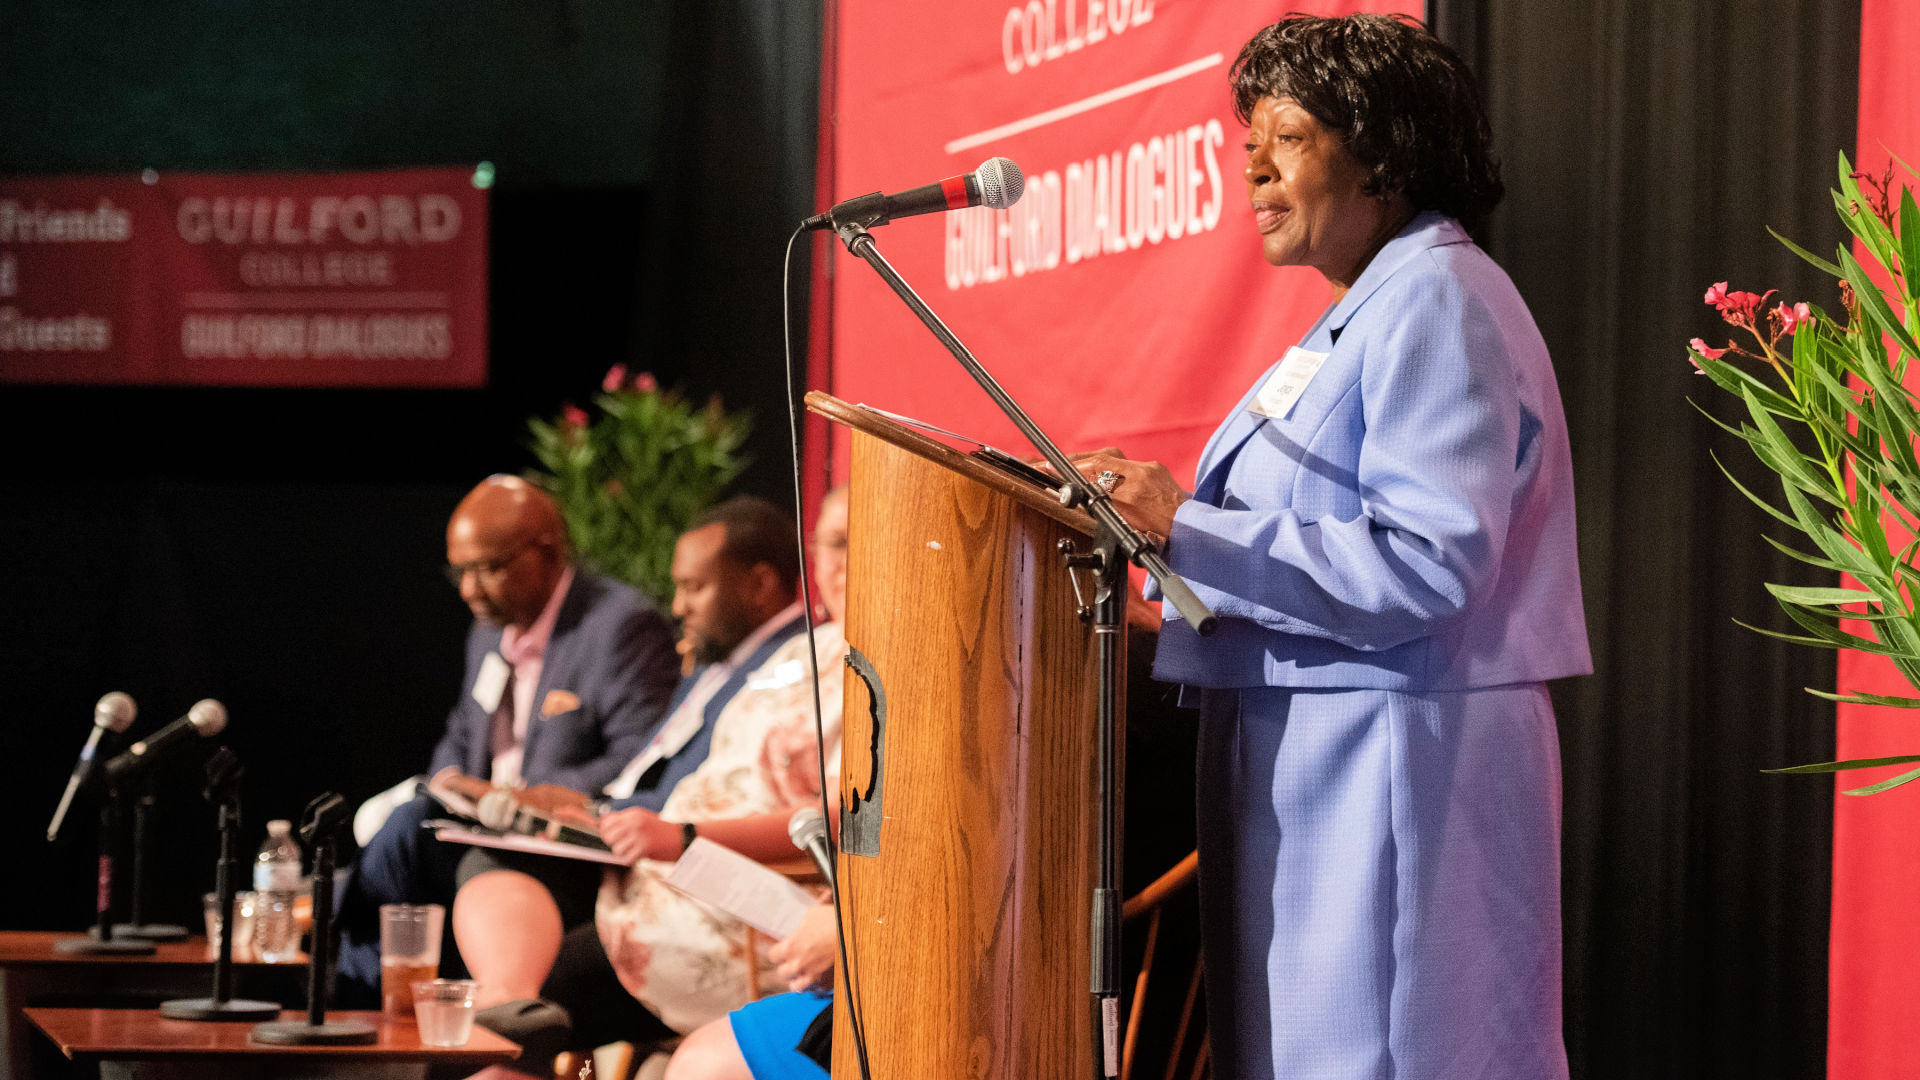 Joyce Hobson Johnson speaks from the podium on stage at the Guilford Dialogues.